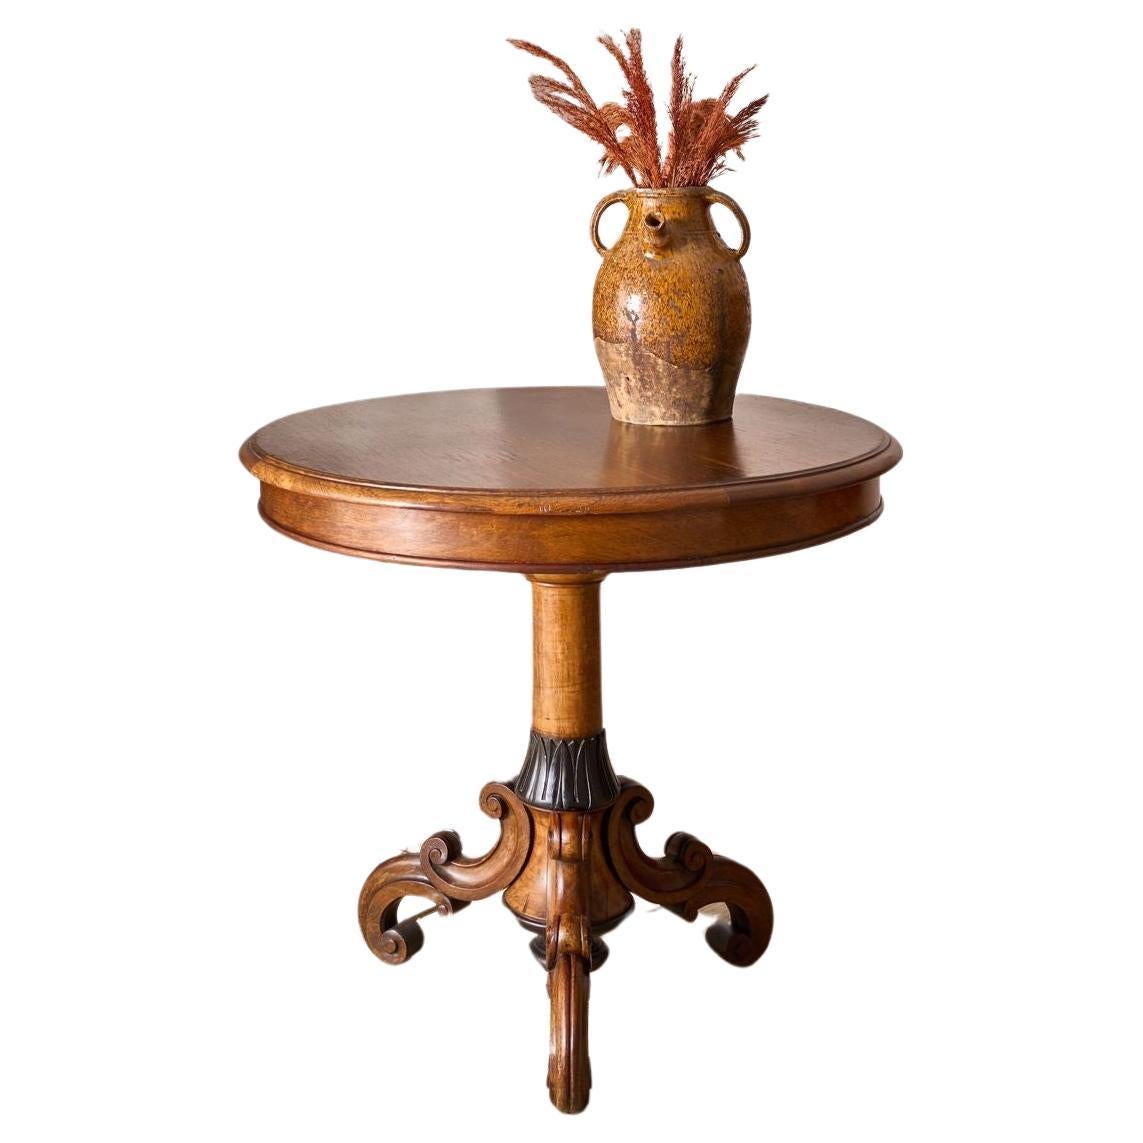 19th century Aesthetic movement rosewood and ebony lamp table